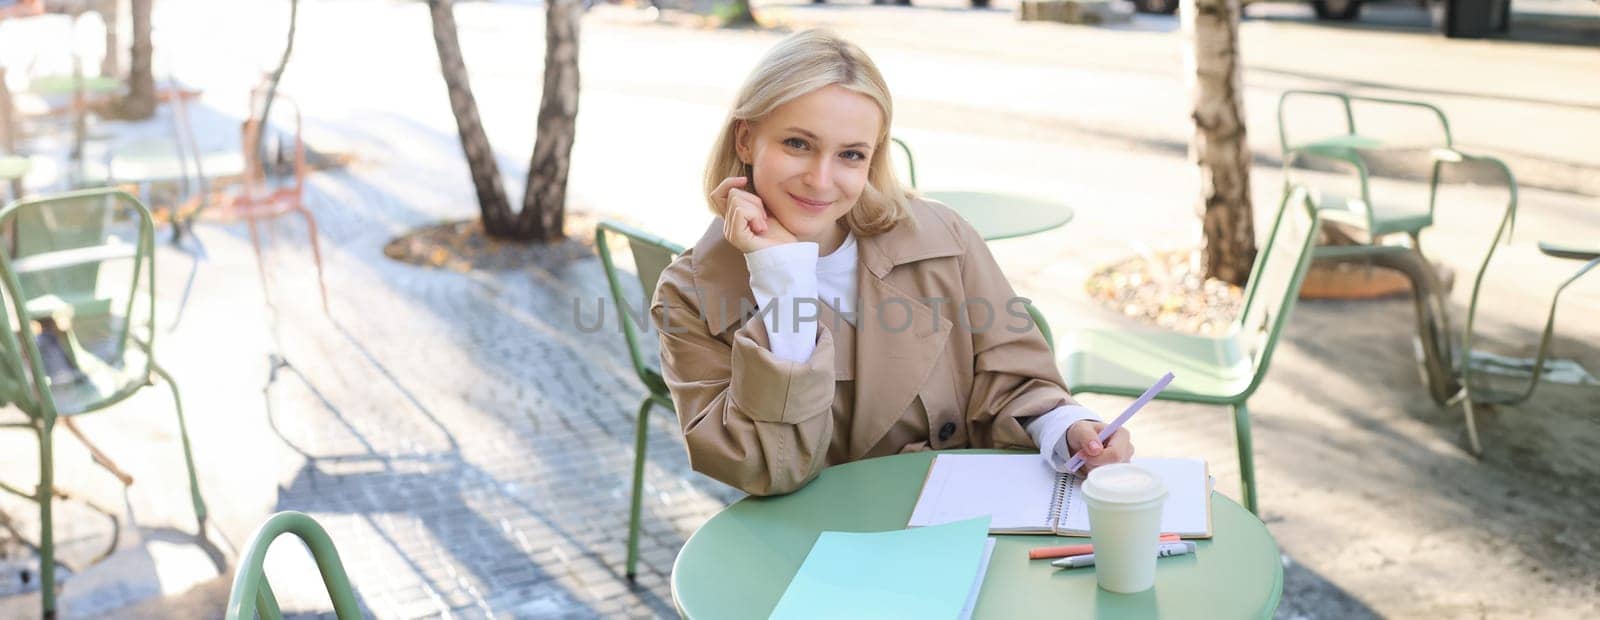 Modern student working on essay in outdoor cafe, doing homework, sitting alone and writing, drinking cup of coffee, smiling at camera.